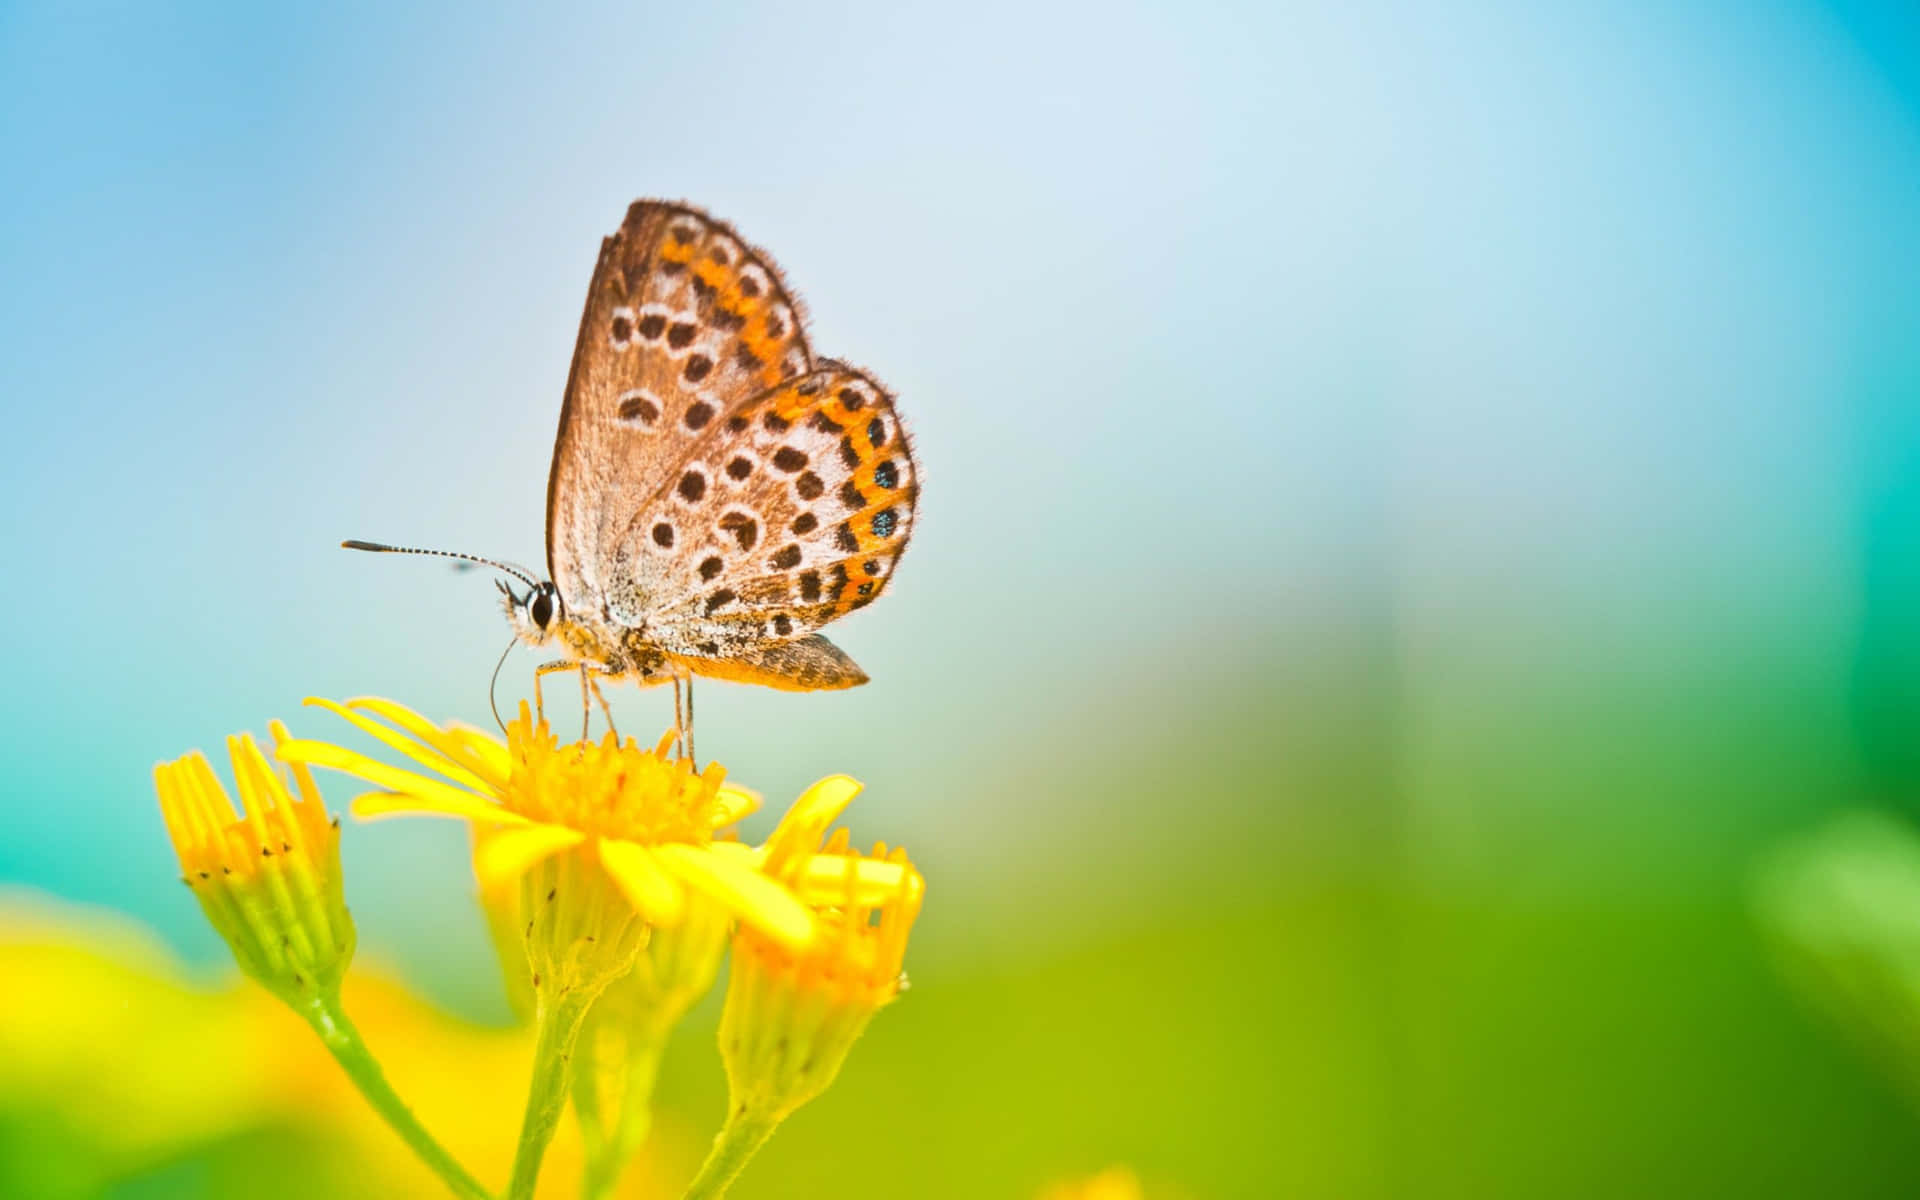 A beautiful butterfly floats through a field of daisies